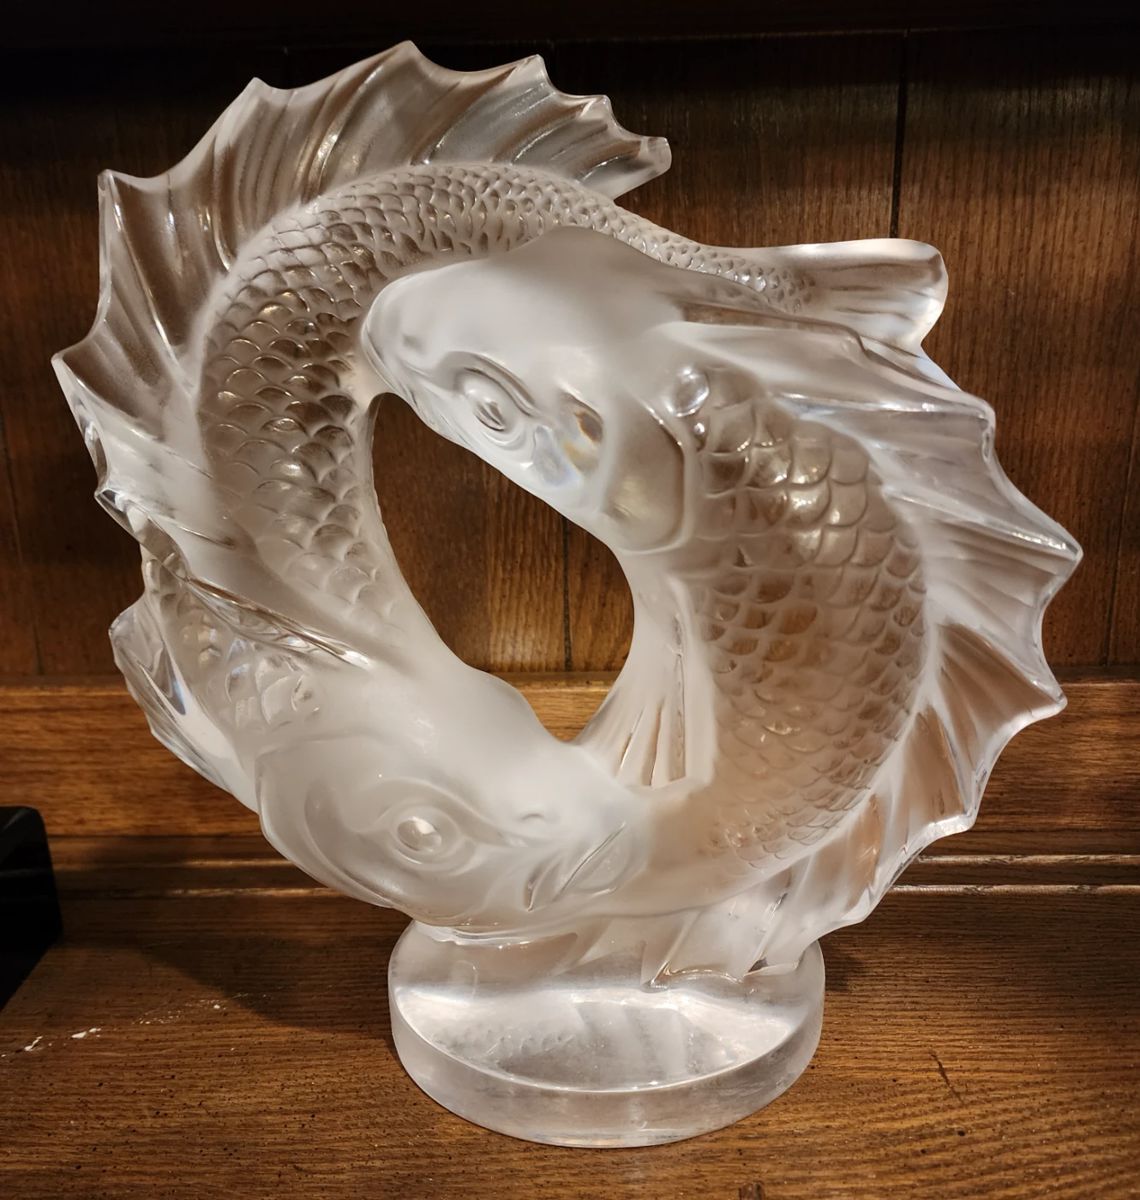 Gorgeous Lalique Large Crystal Sculpture "Deux Poisson" - We will be adding more pictures - Lots more to post,